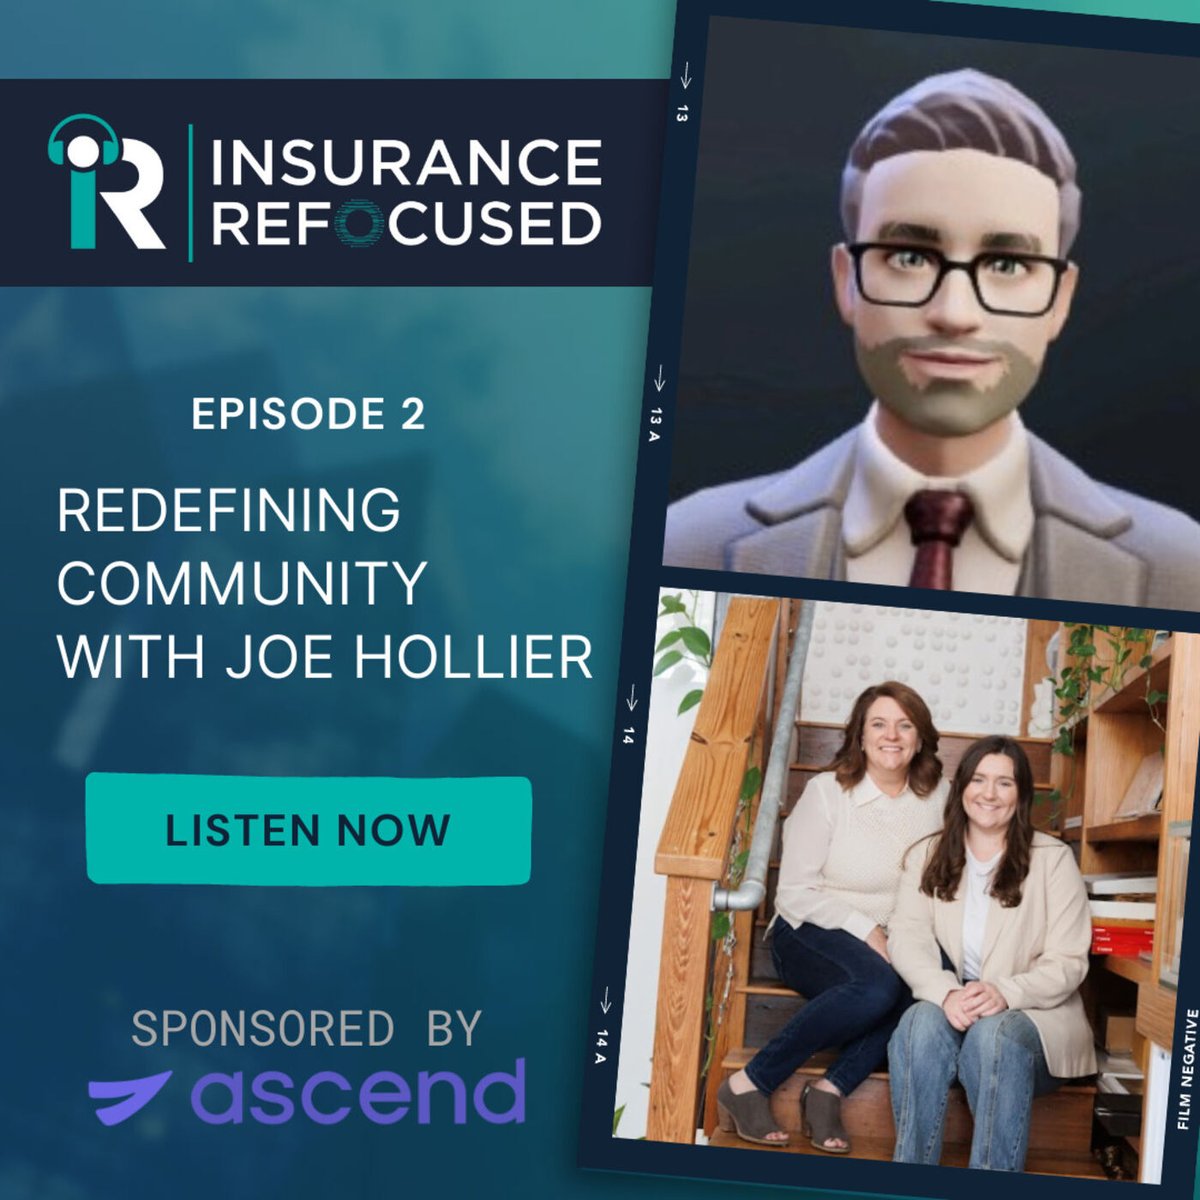 Episode 2 - Redefining community with joe hollier